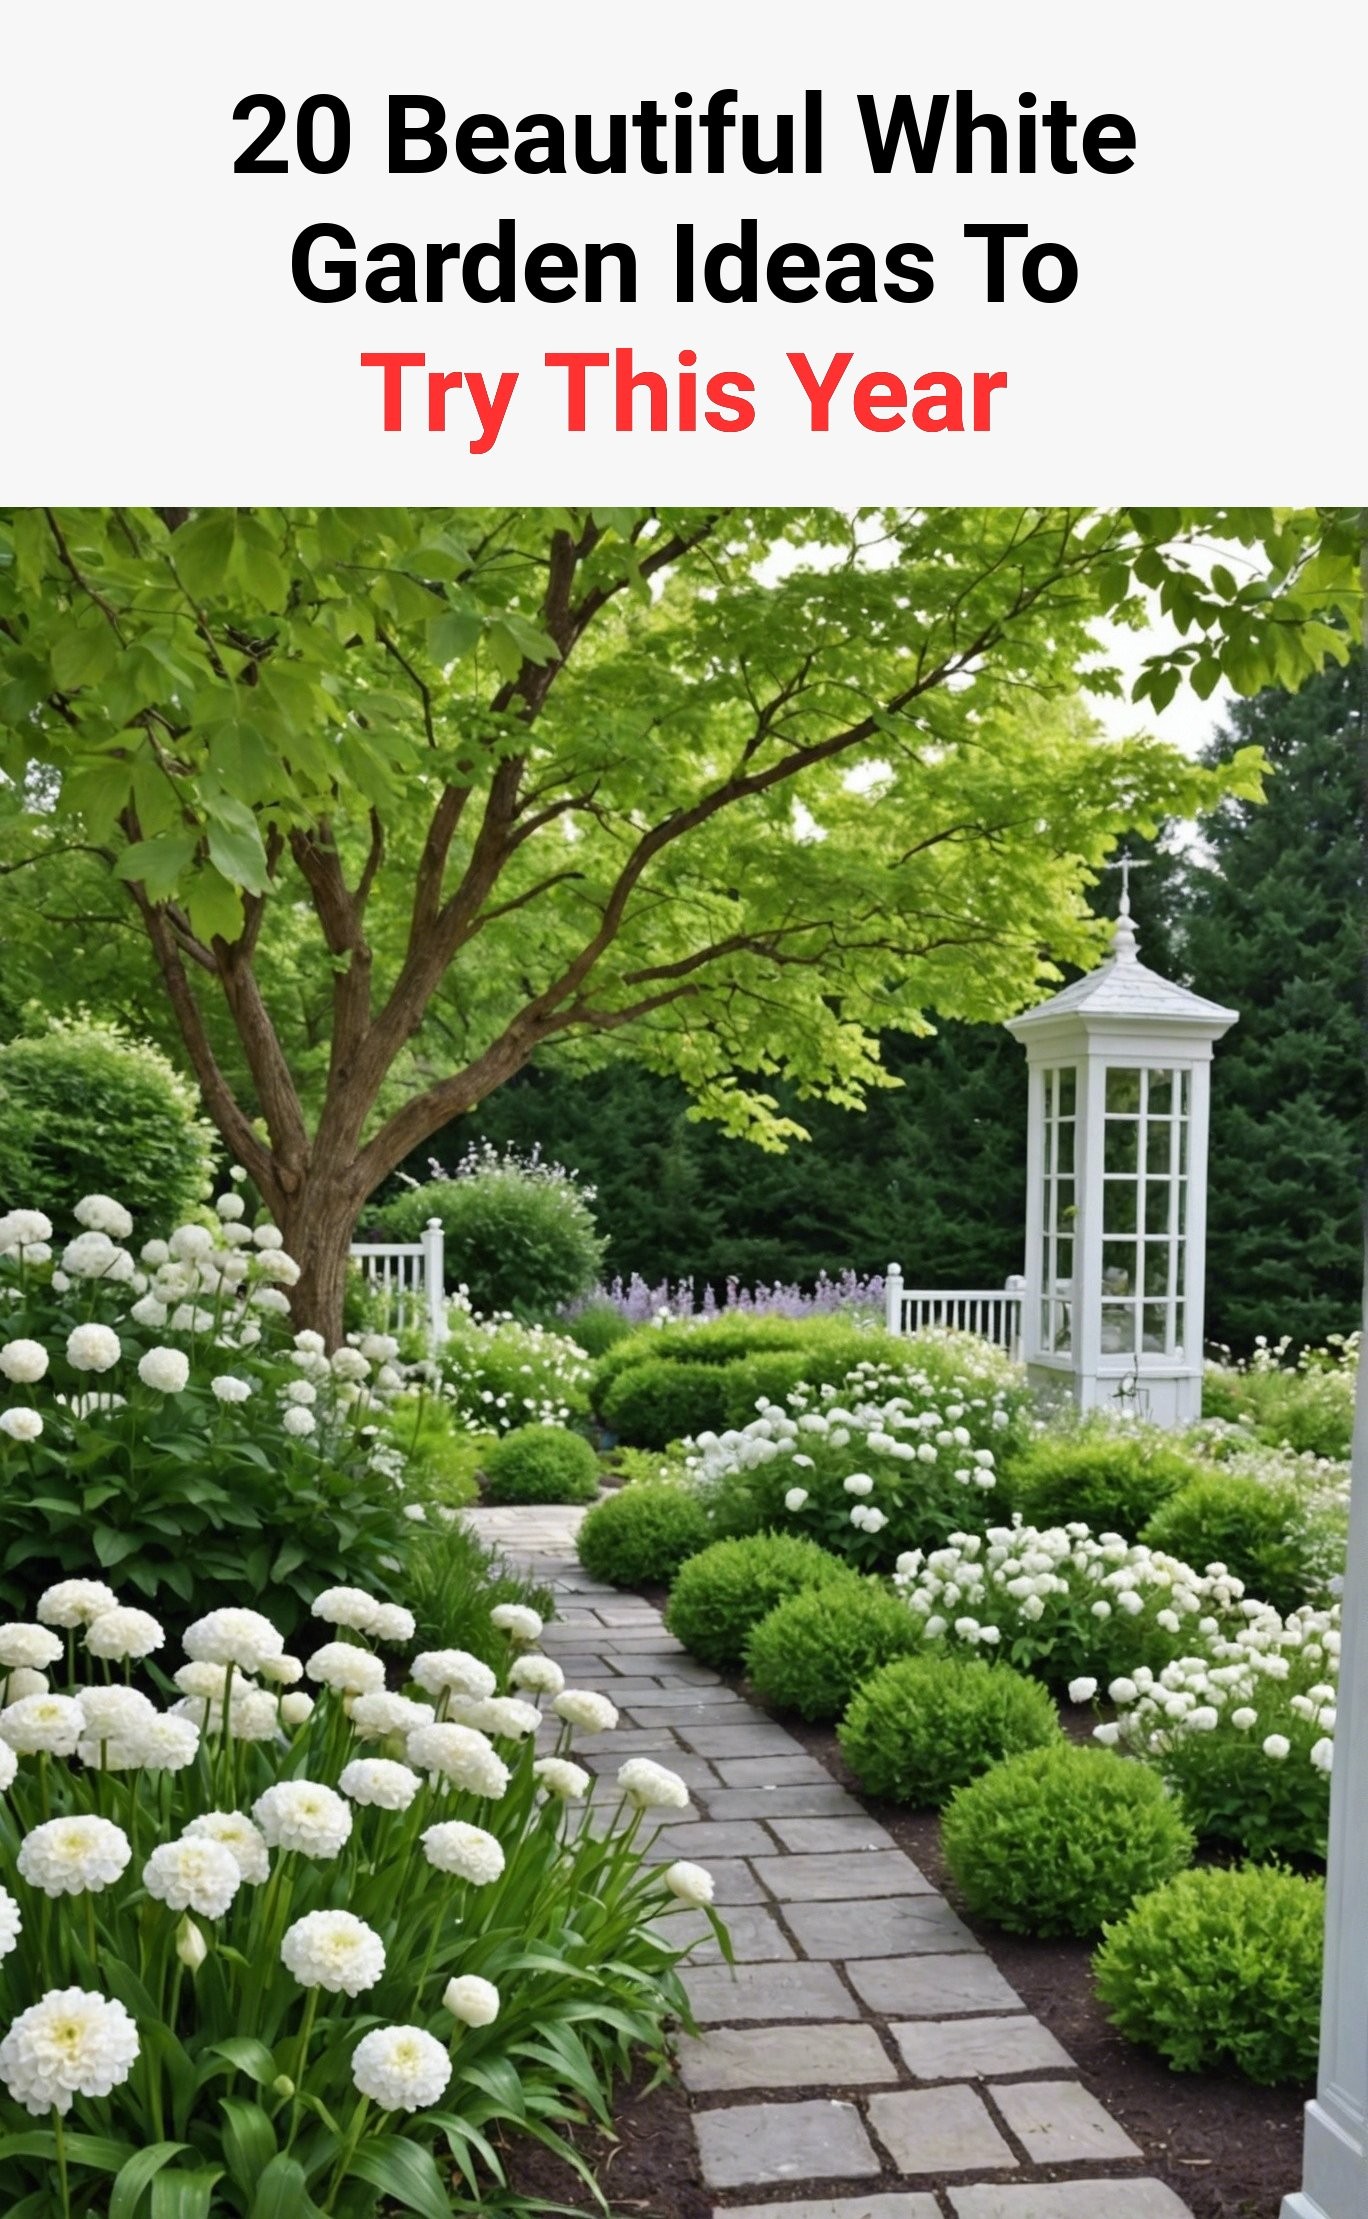 20 Beautiful White Garden Ideas To Try This Year